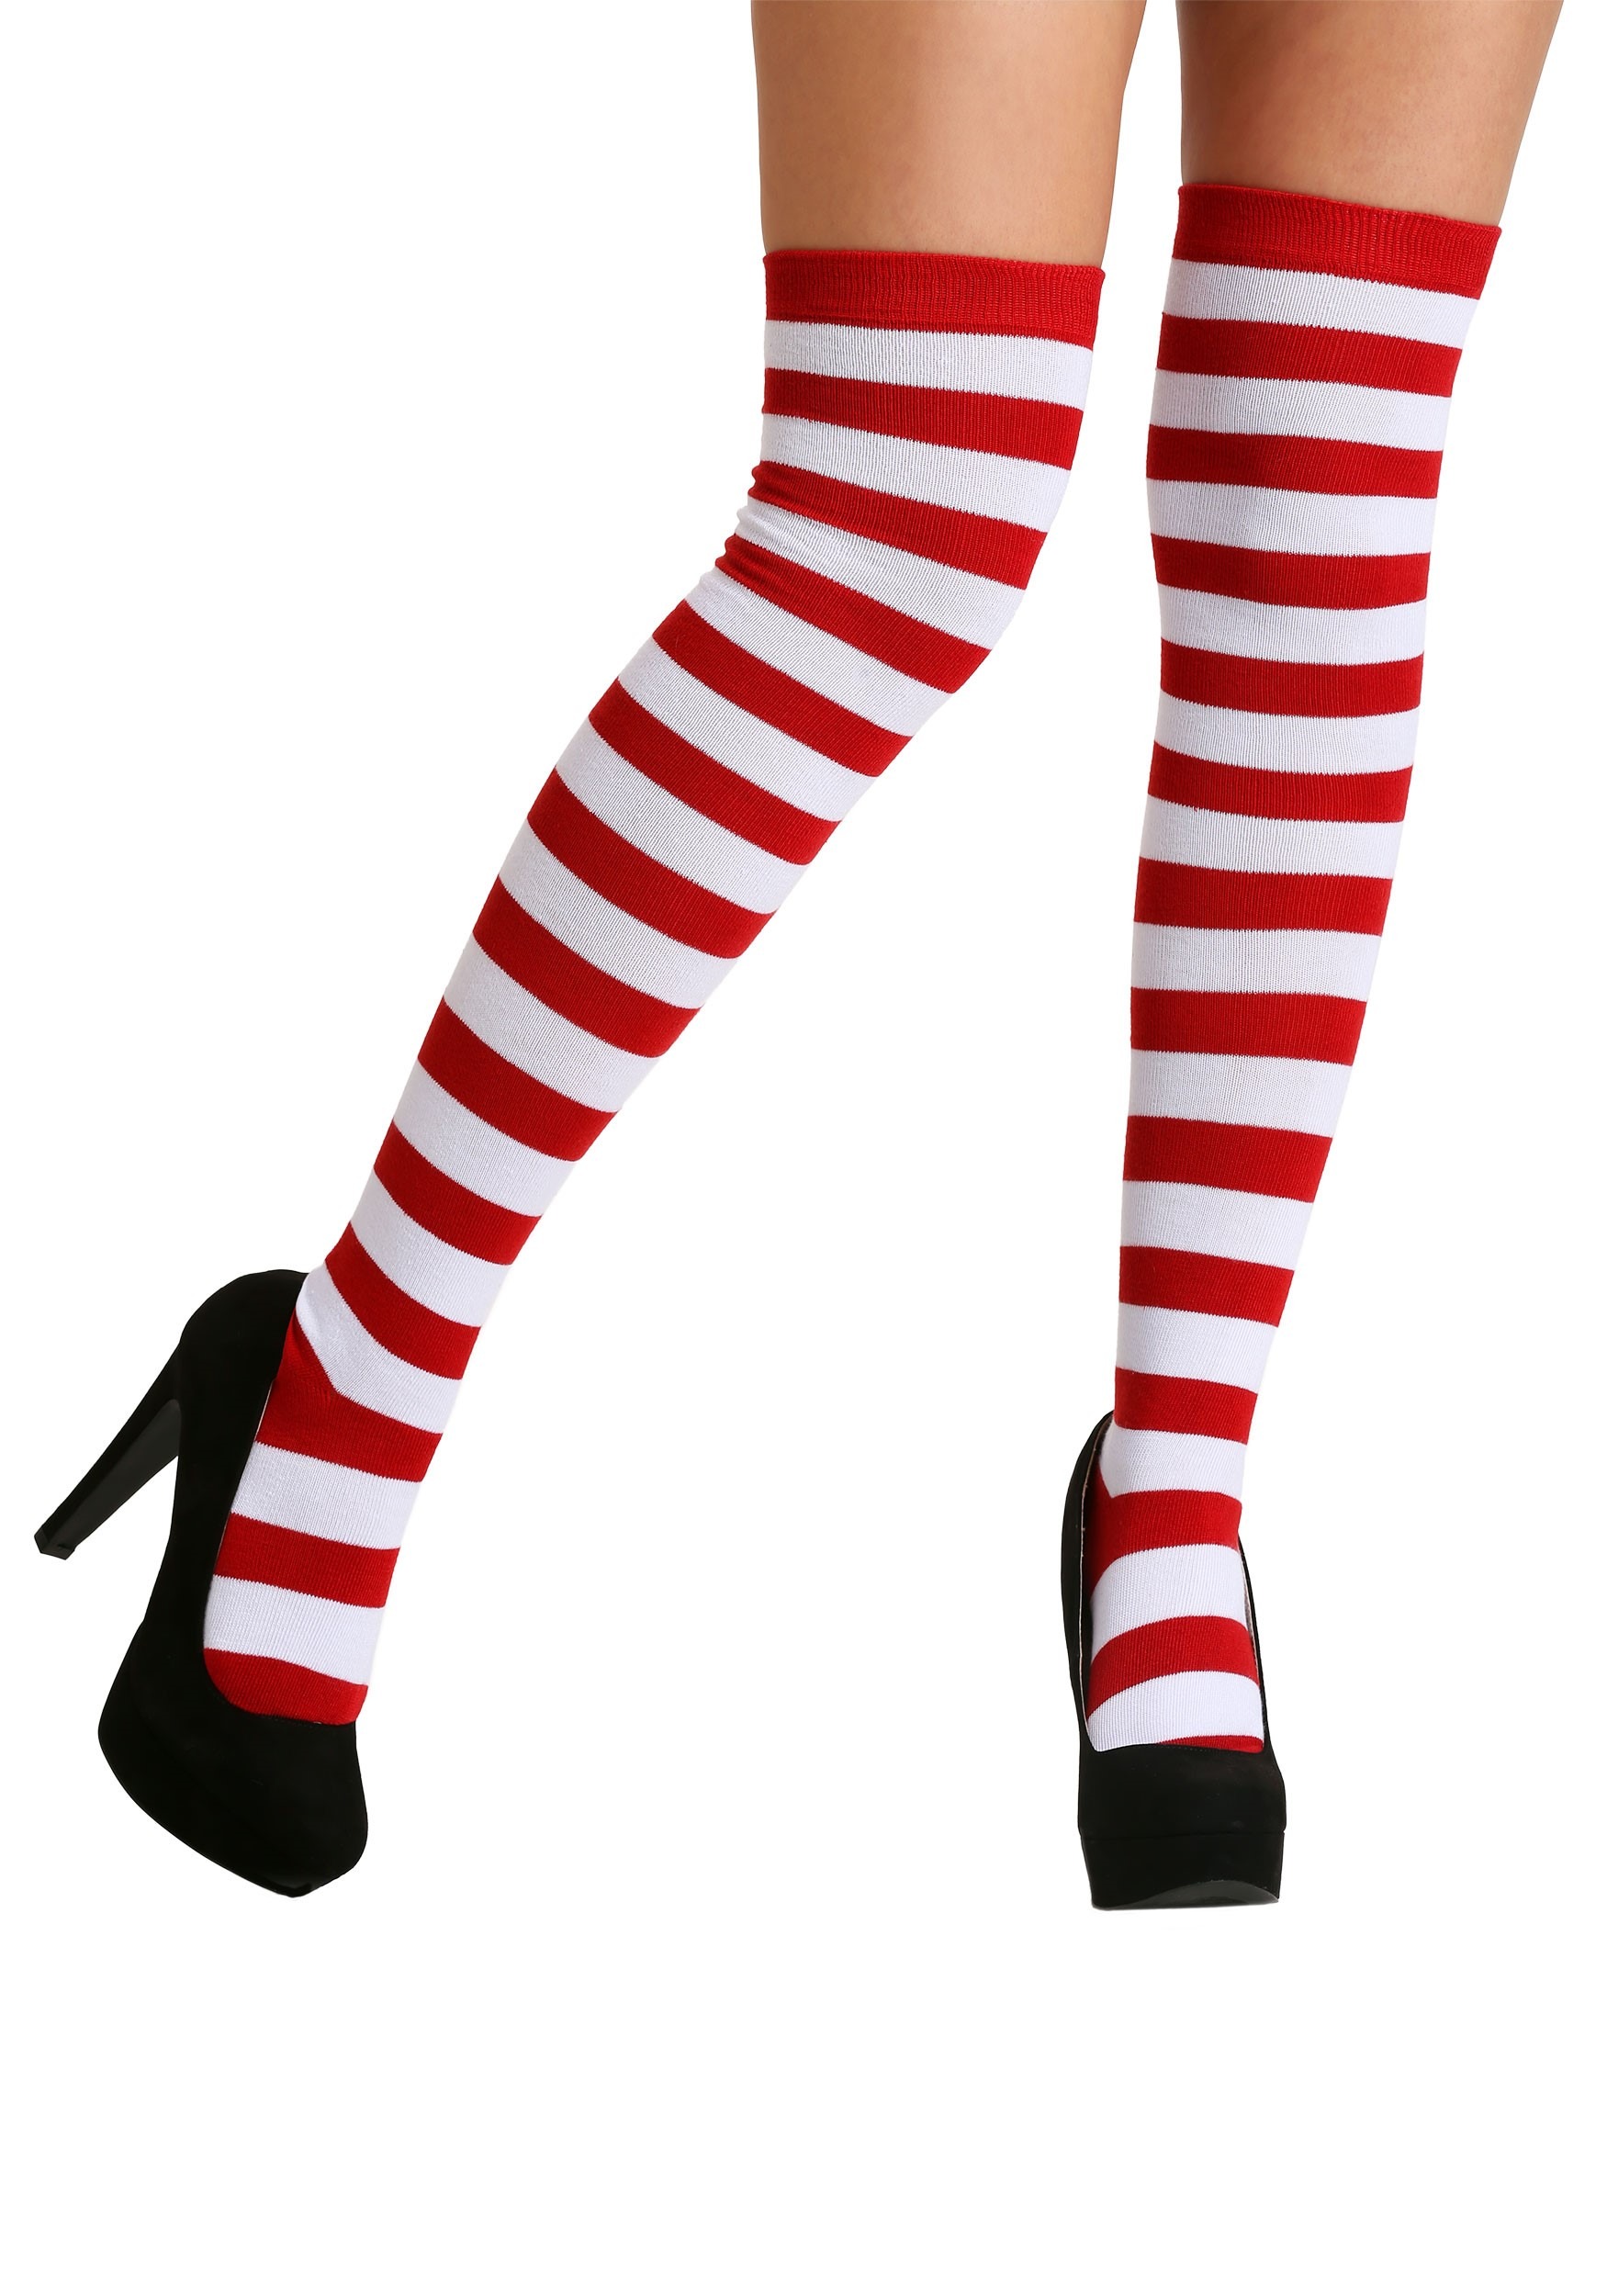 https://images.halloweencostumes.com/products/52611/1-1/adult-red-and-white-socks-for-adults.jpg